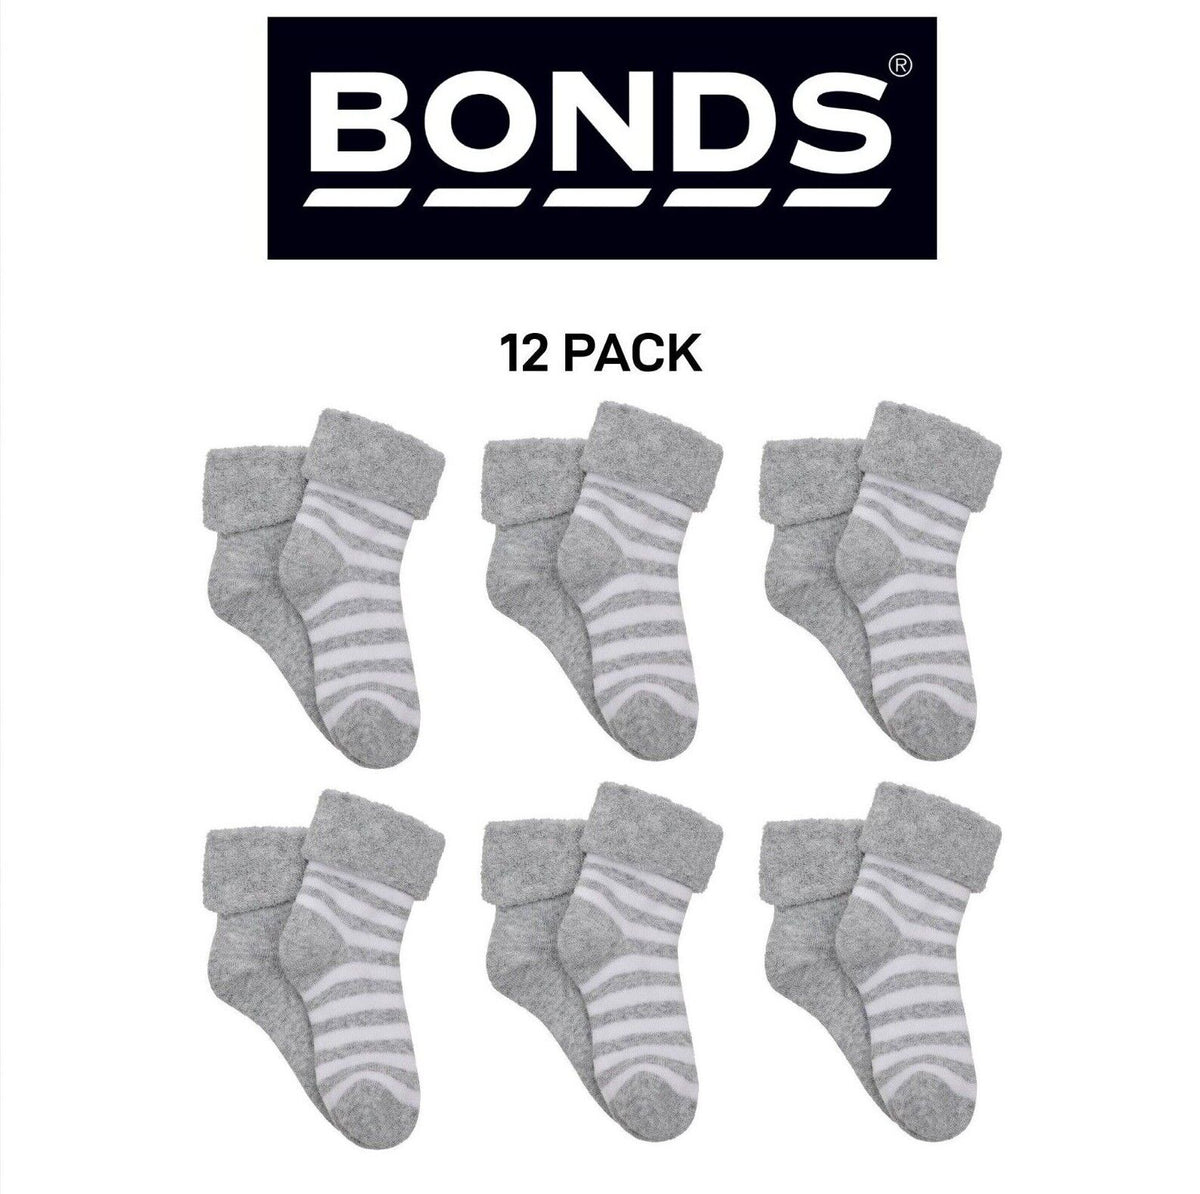 Bonds Baby Wondersock Super Soft Cotton and Durable Comfy 12 Pack R6289T